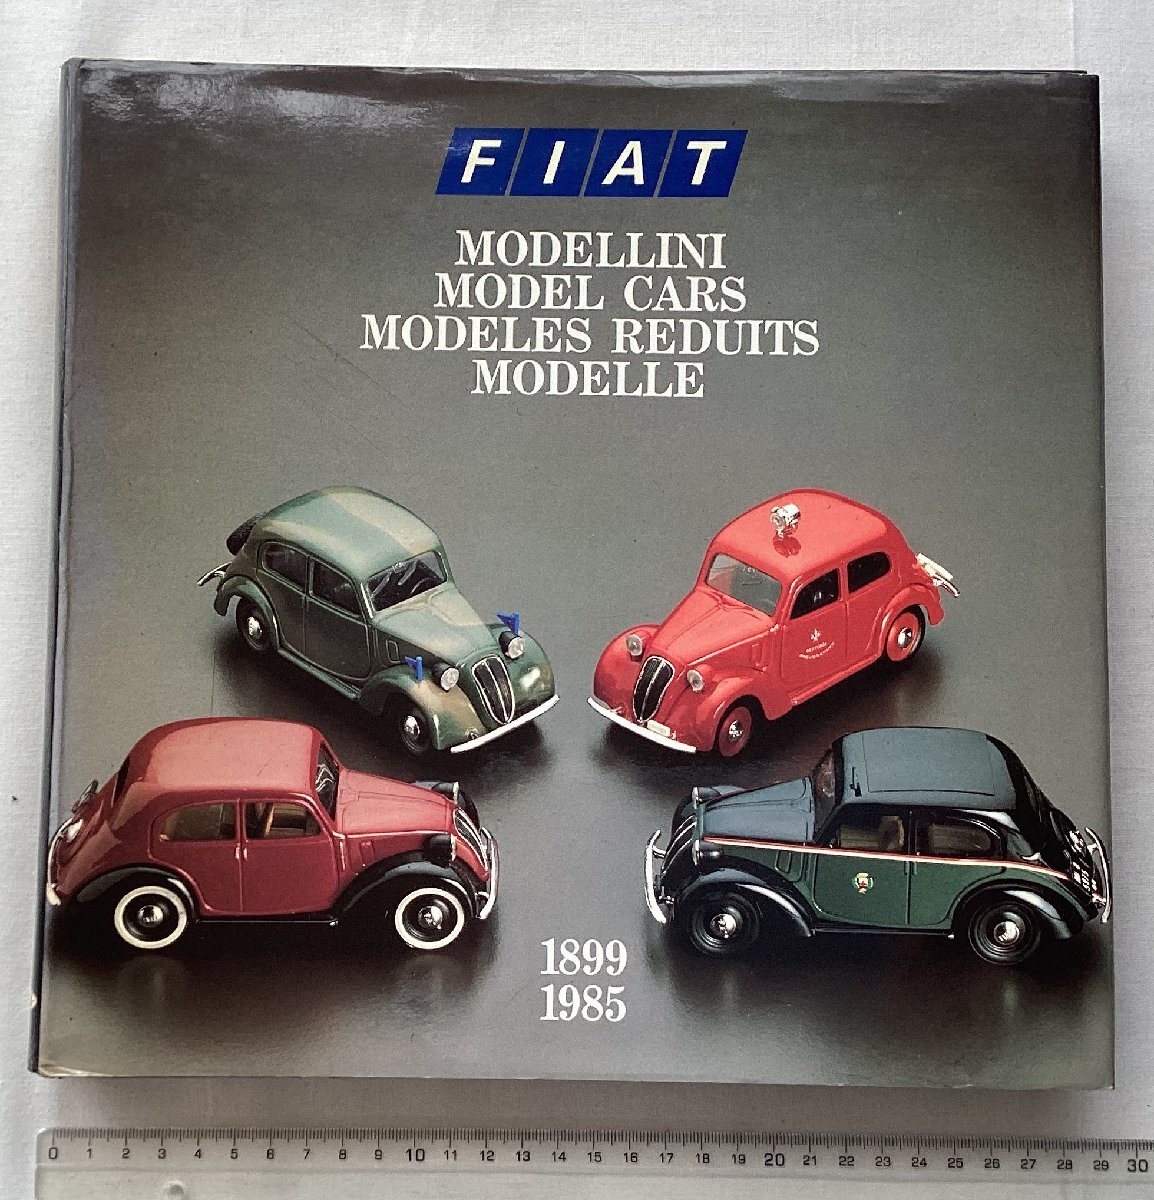 *[A13027* special price foreign book FIAT MODEL CARS ] Fiat * model The Cars.*